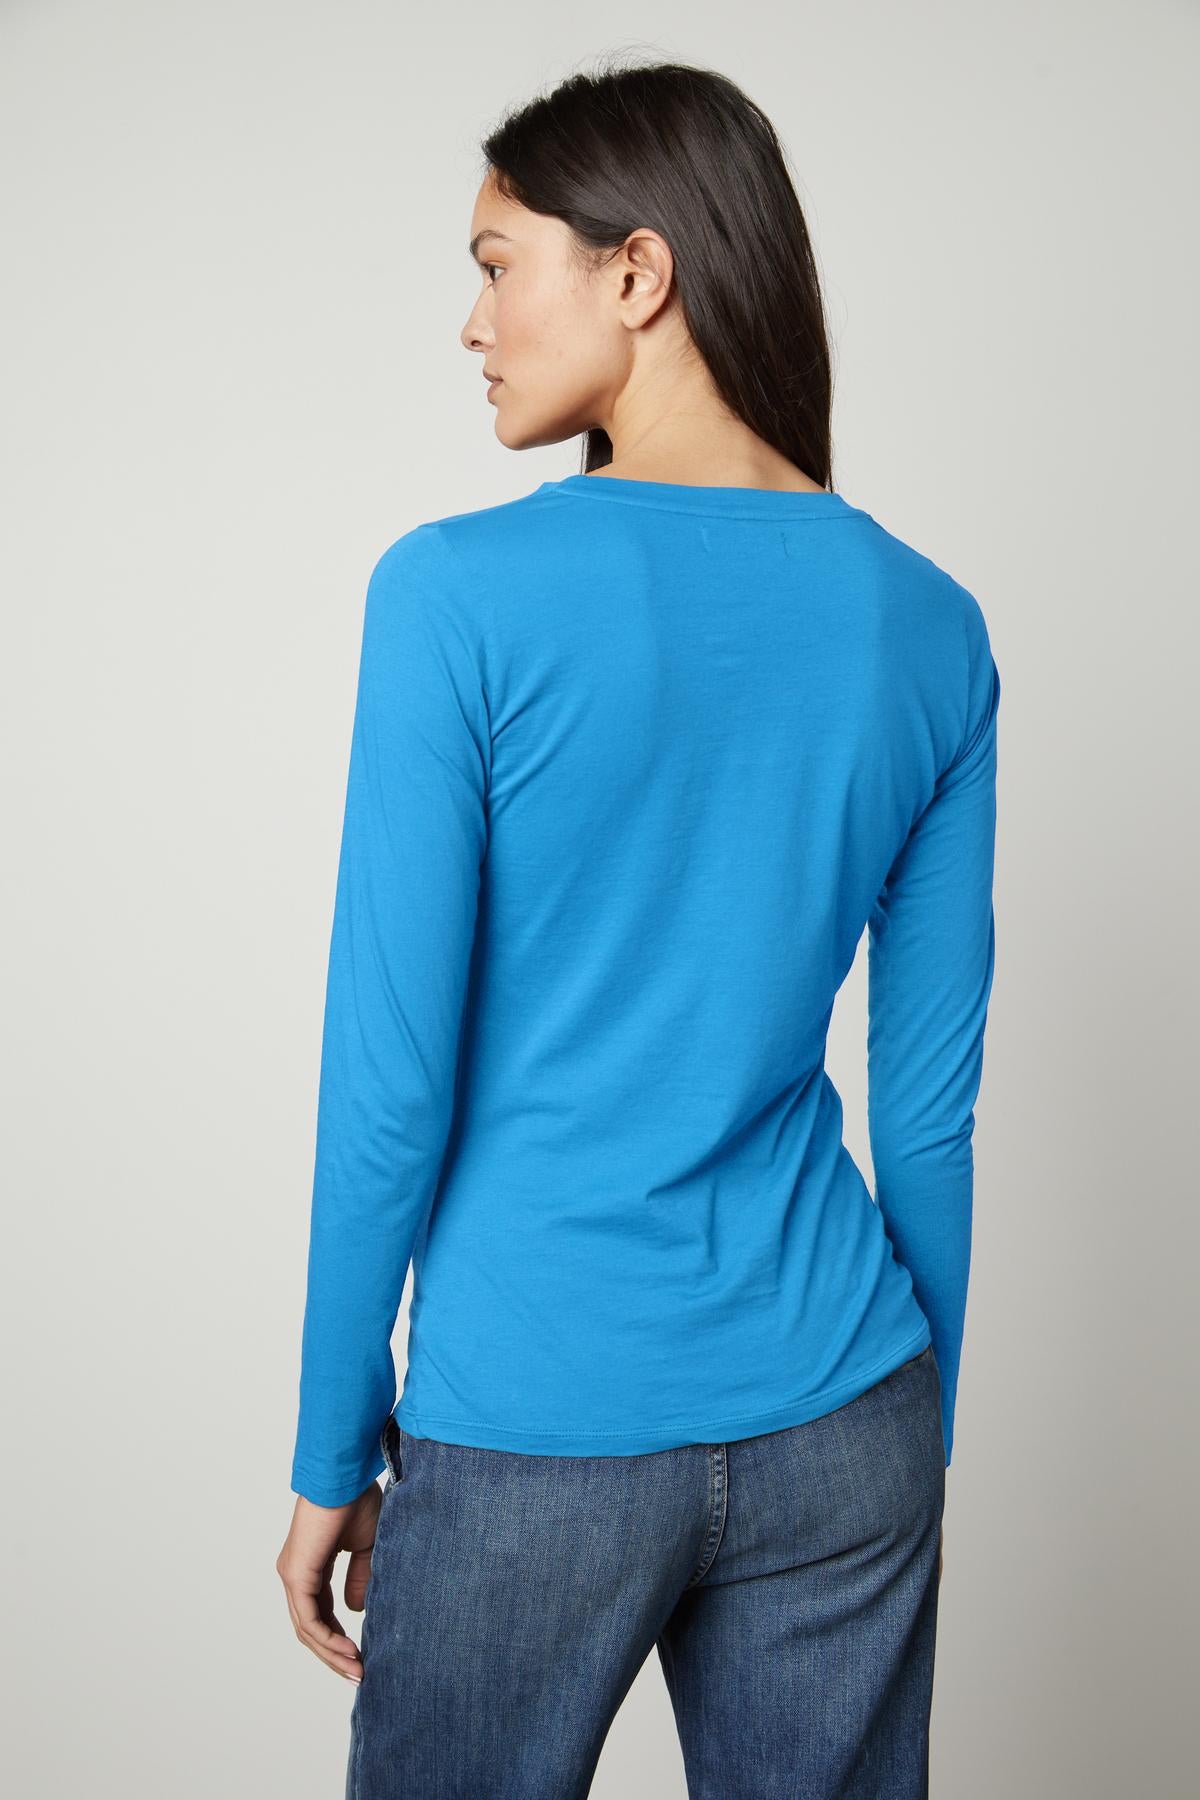 The back view of a woman wearing a Velvet by Graham & Spencer ZOFINA GAUZY WHISPER FITTED CREW NECK TEE, blue long-sleeve tee.-35503495381185